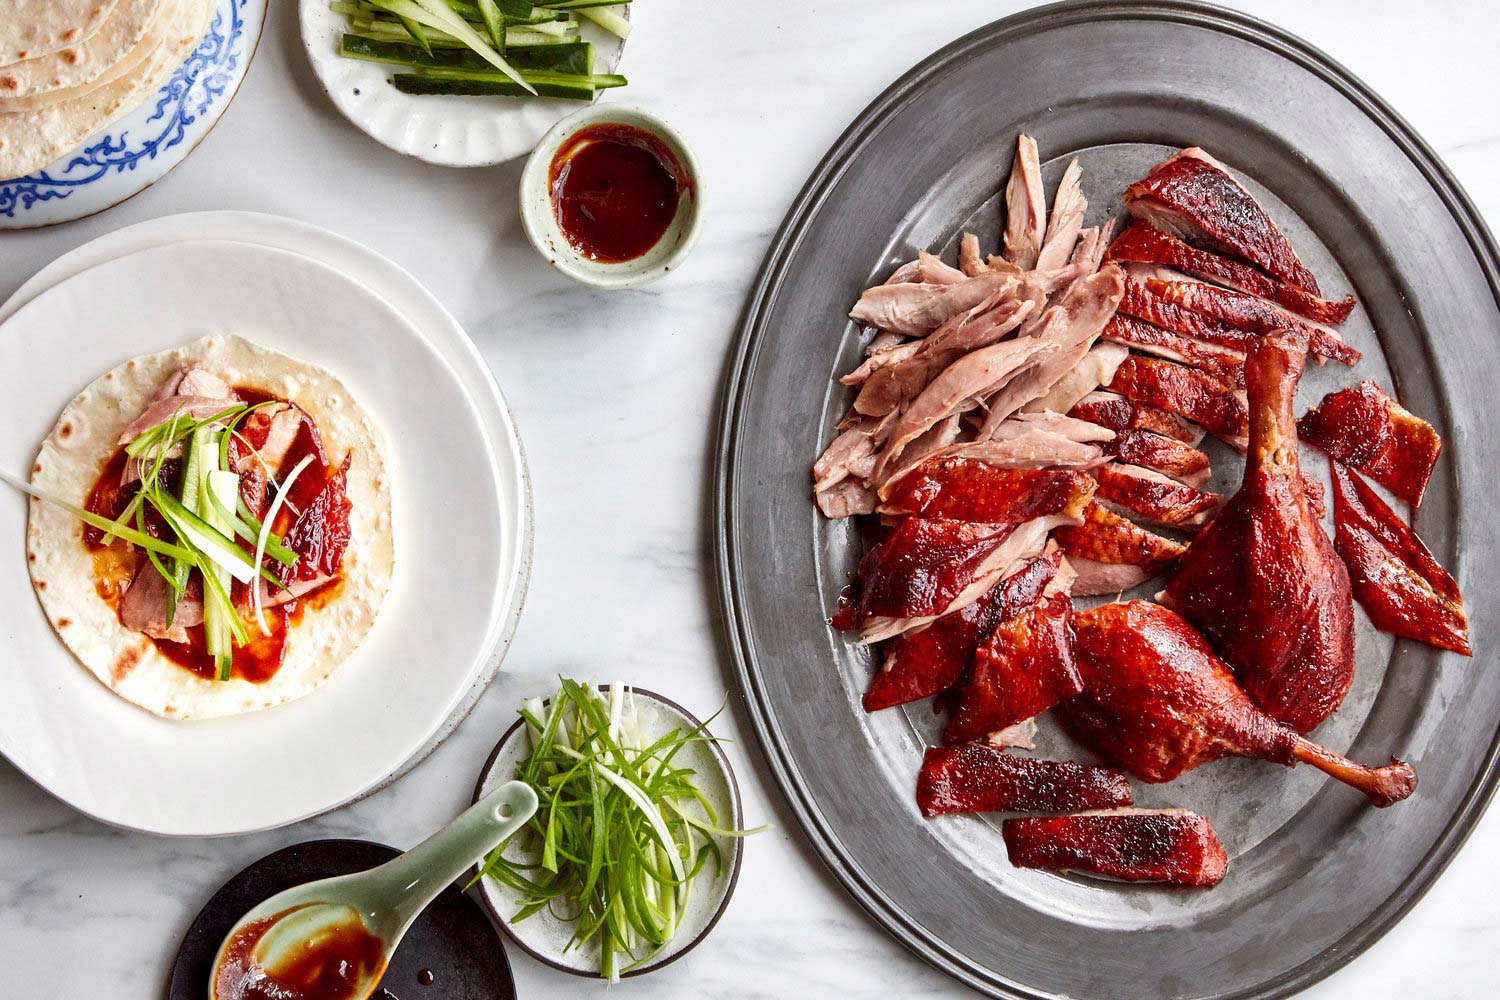 🍖 Can We Guess Your Age and Gender Based on the Meats You’ve Eaten? Peking duck